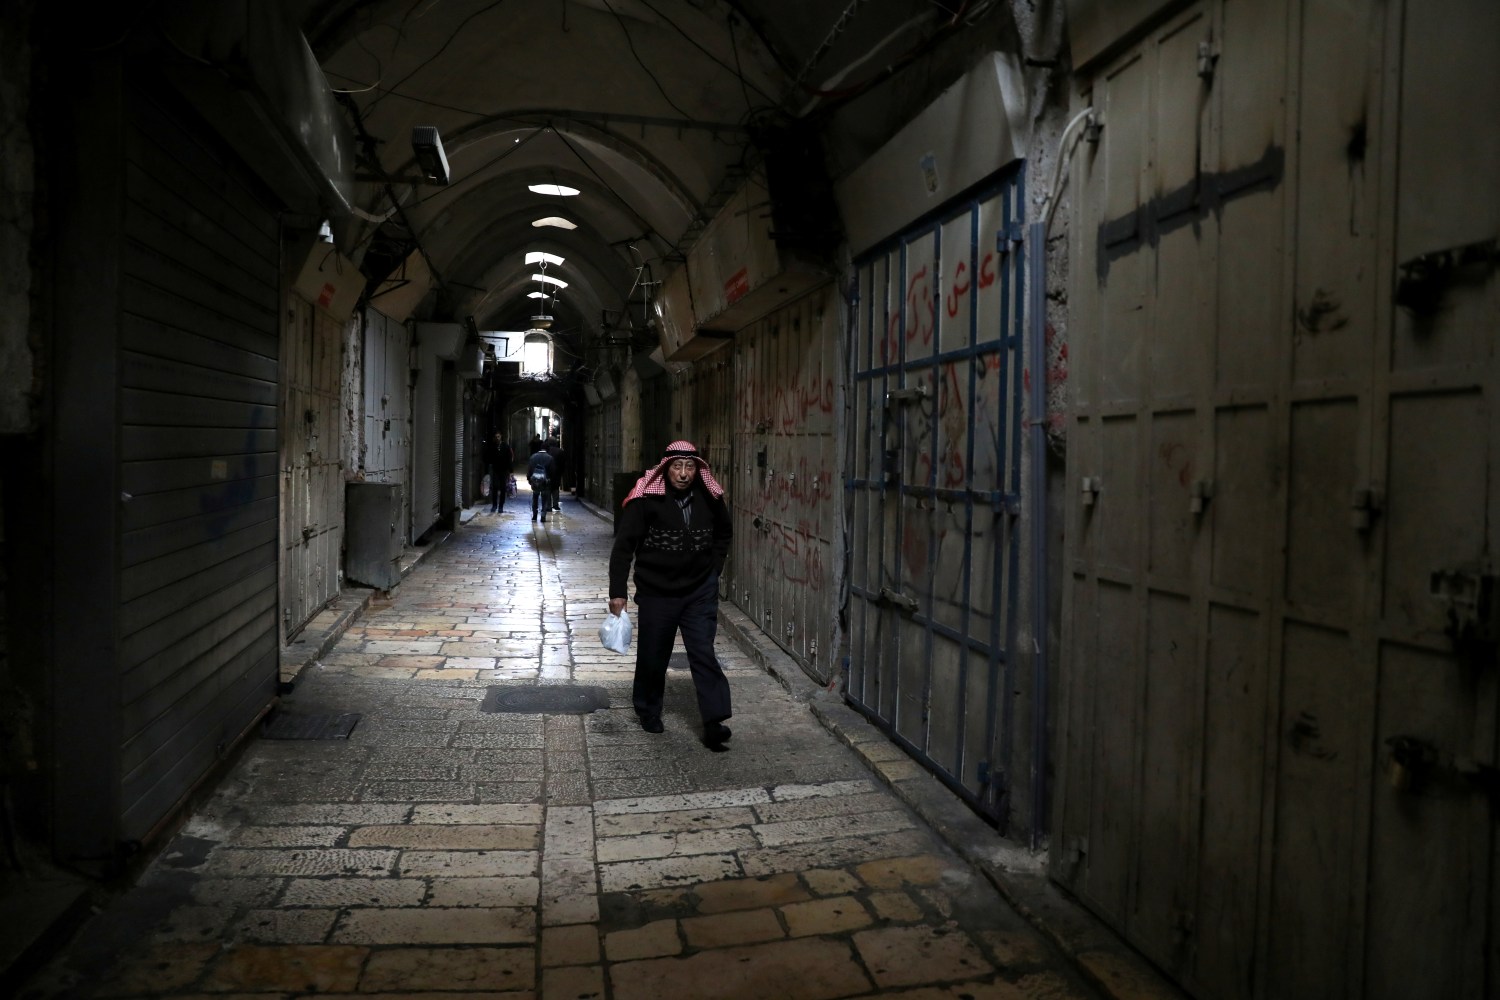 A Palestinian man walks past closed shops after Palestinian secular and Islamist factions called a general strike to protest U.S. President Donald Trump's announcement that he has recognized Jerusalem as Israel's capital, in Jerusalem's Old City December 7, 2017. REUTERS/Ammar Awad - RC178CF28F50